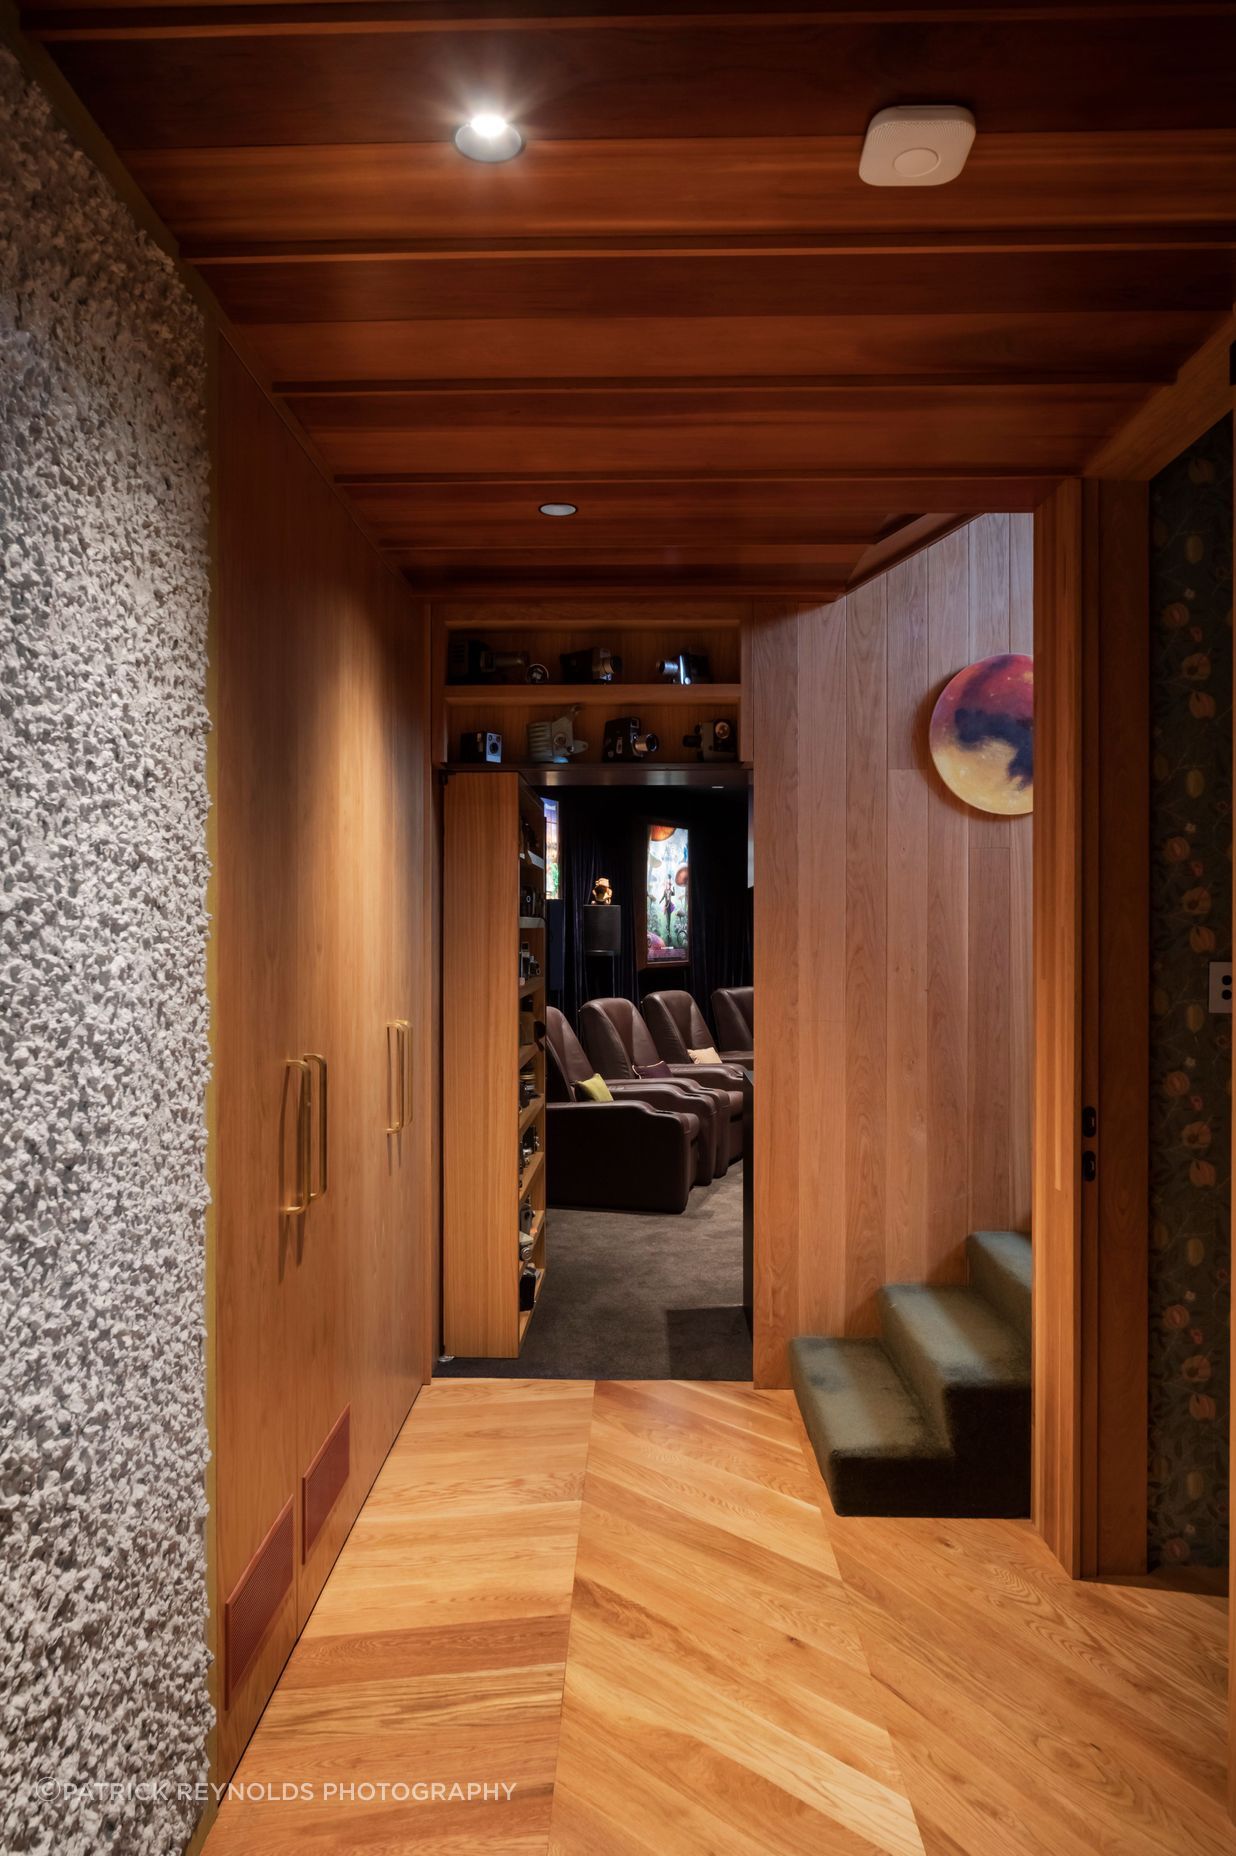 “The movie theatre is a large component of the downstairs area. It’s through a hidden bookshelf door. That was a really fun process,” says Brad. All the theatre fittings came from the Green family’s previous home.